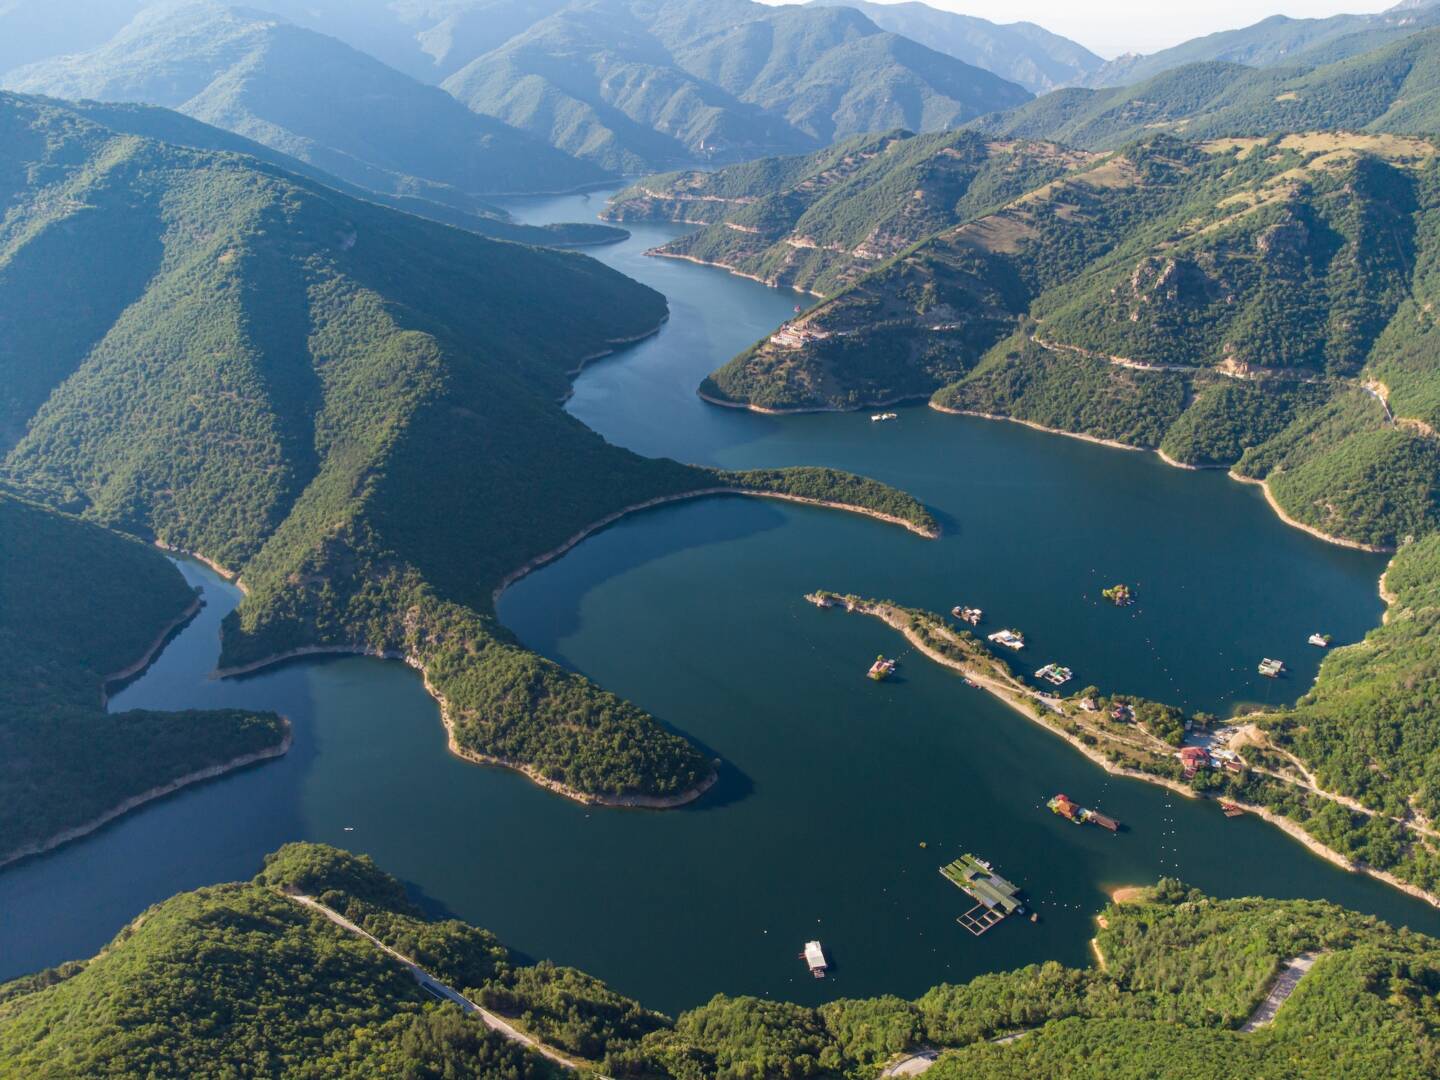 Aerial panoramic view of Vacha Reservoir located in Bulgaria near the Devin city, Rhodopa Mountains